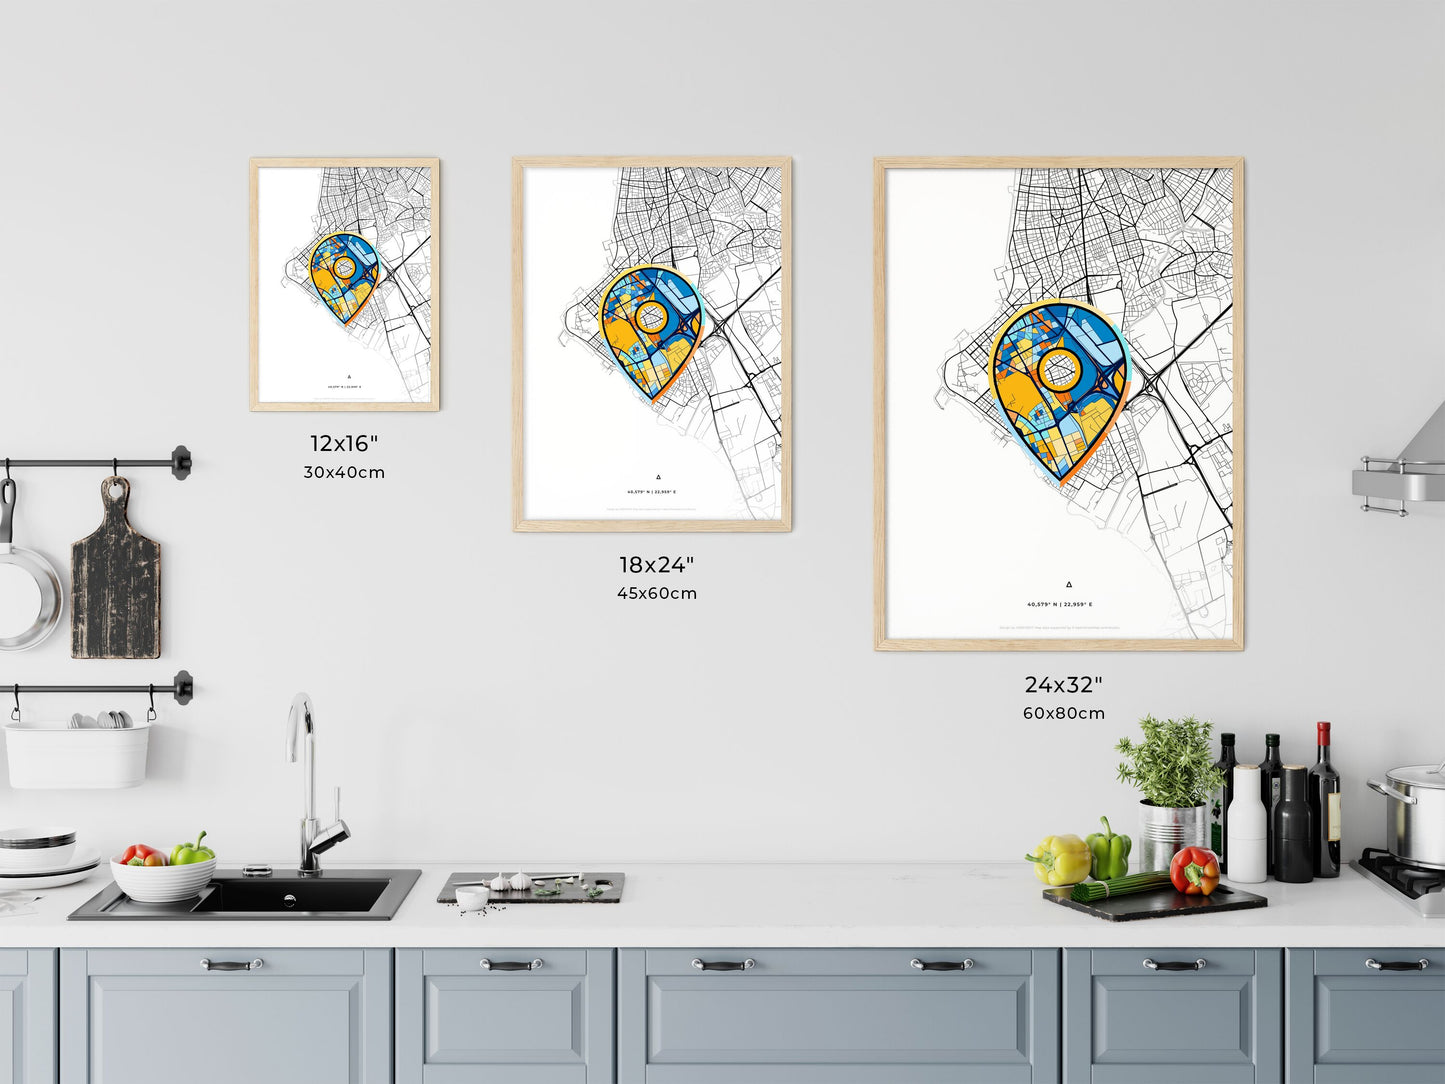 KALAMARIA GREECE minimal art map with a colorful icon. Where it all began, Couple map gift.